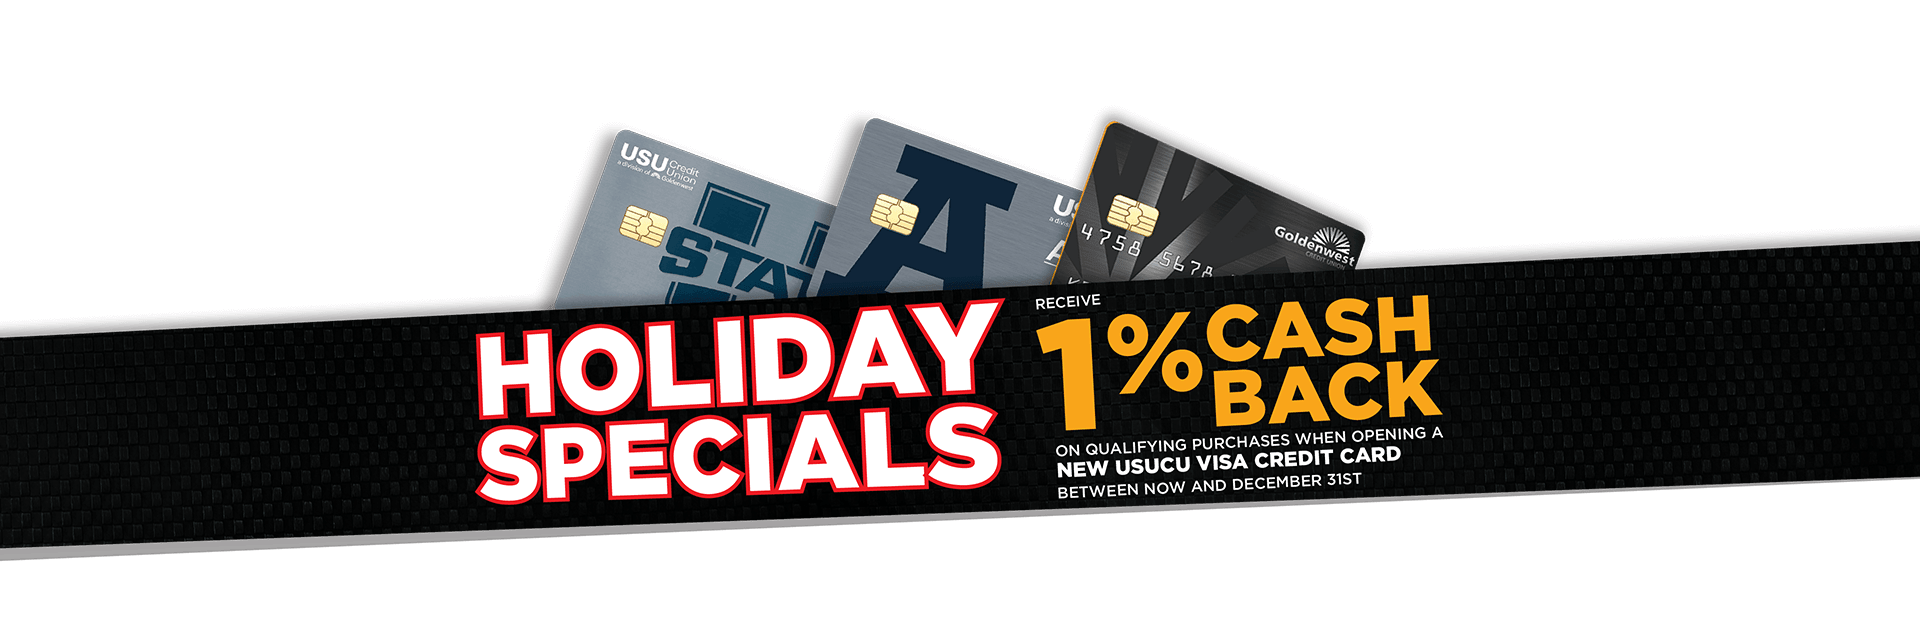 1% cash Back on qualifying purchases when opening a new USU Credit Union Visa Credit Card between now and December 31st.